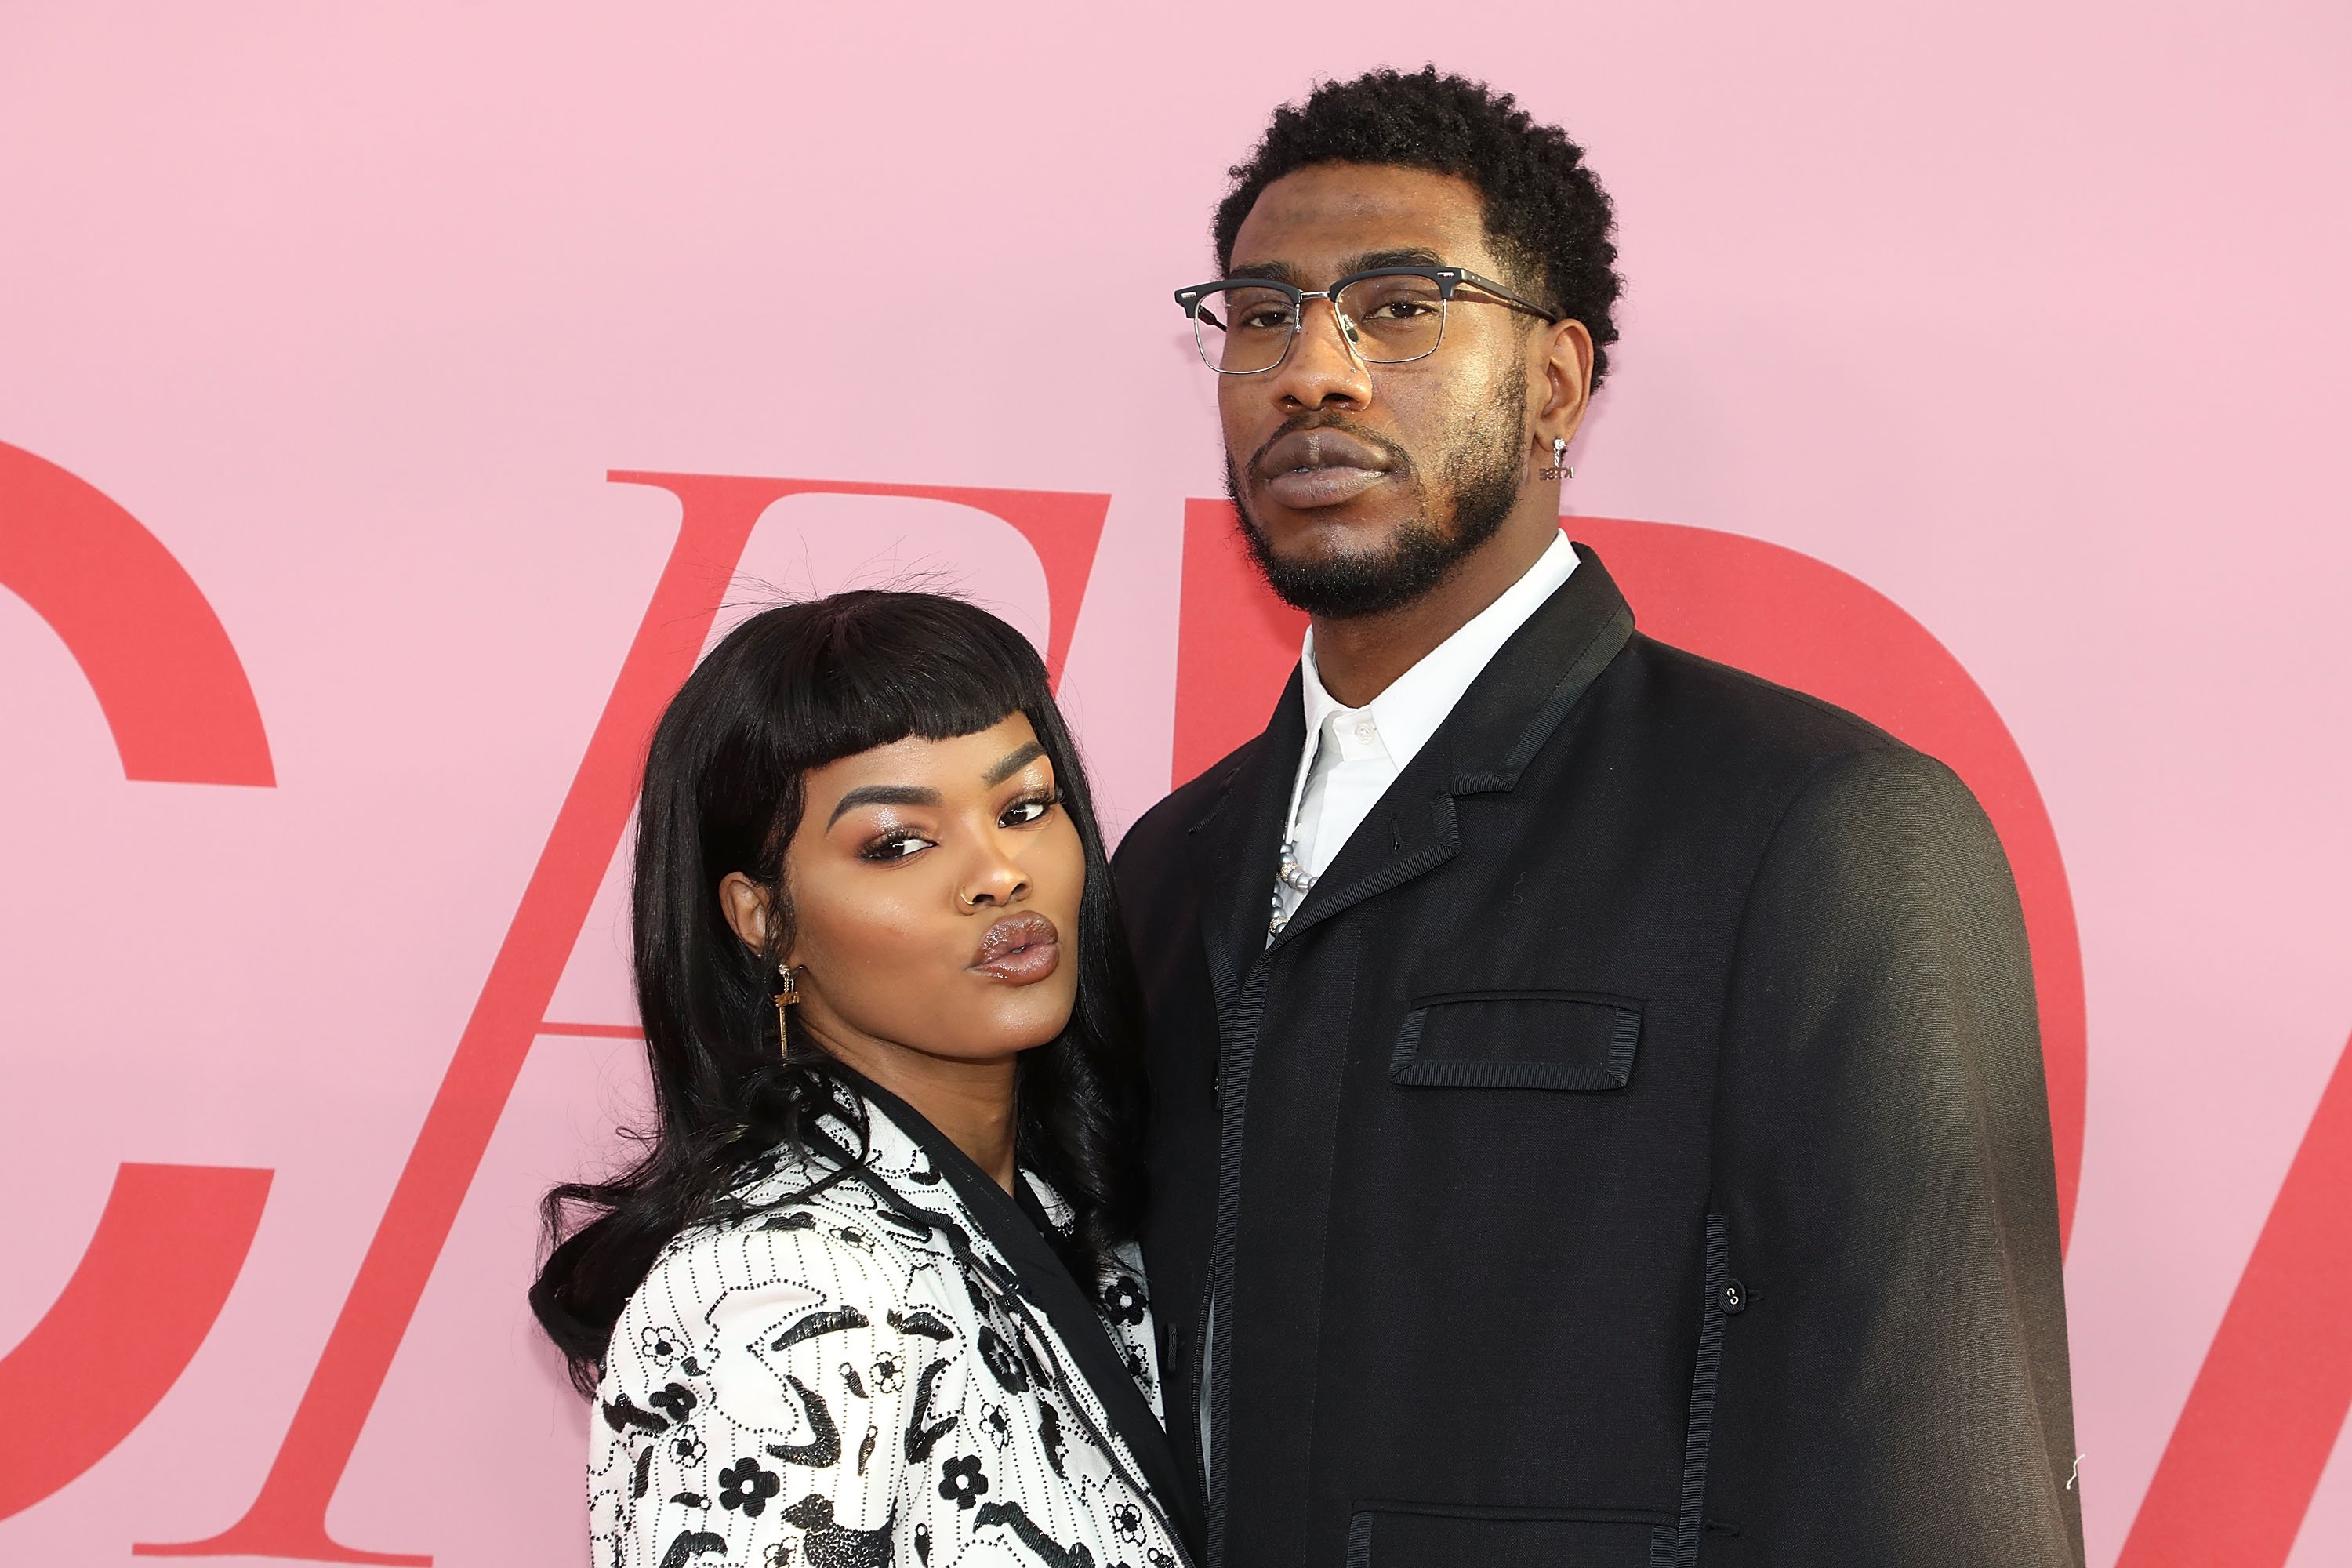 Teyana Taylor and Iman Shumpert at the 2019 CFDA Awards at The Brooklyn Museum on June 3, 2019 in New York City | Photo: Getty Images